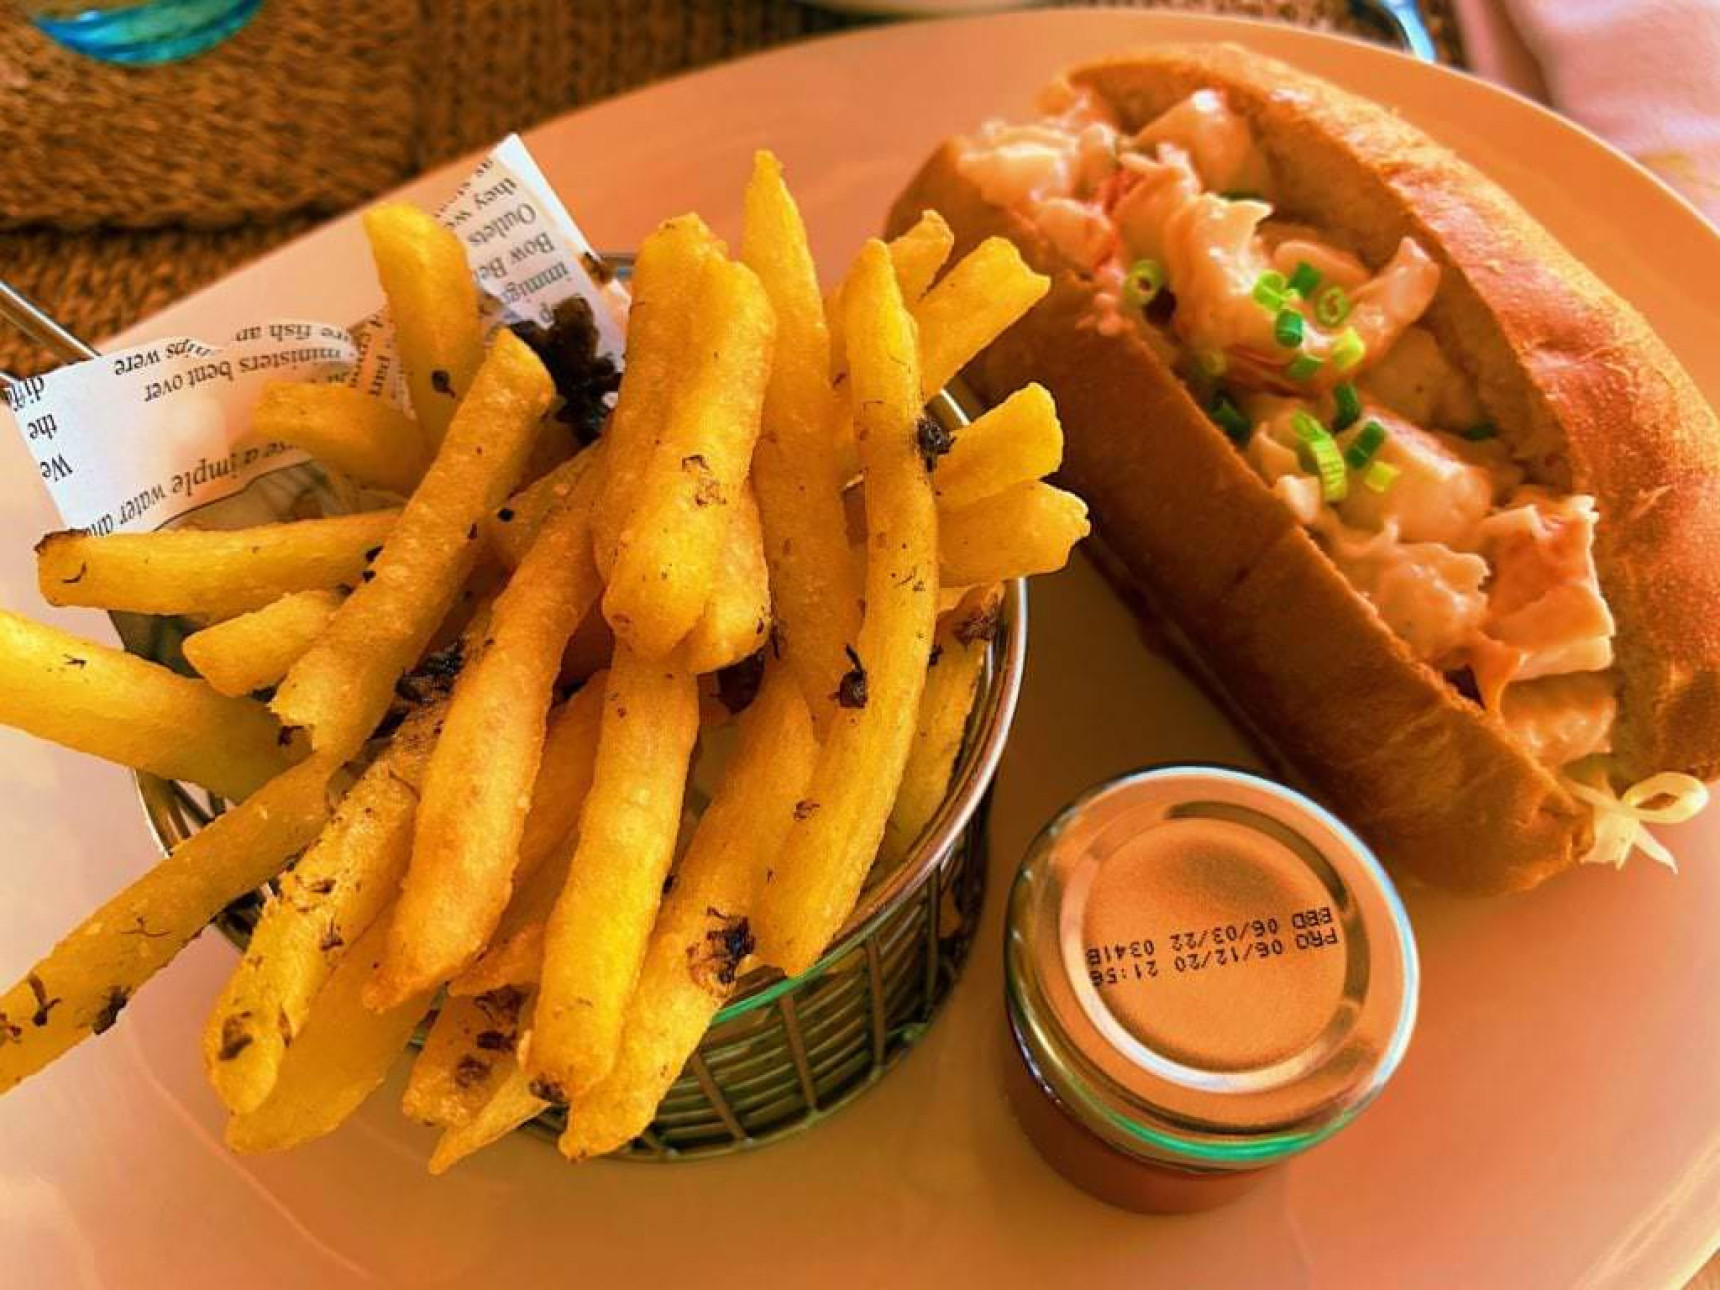 The star of the show - Lobster Roll with Truffle Fries